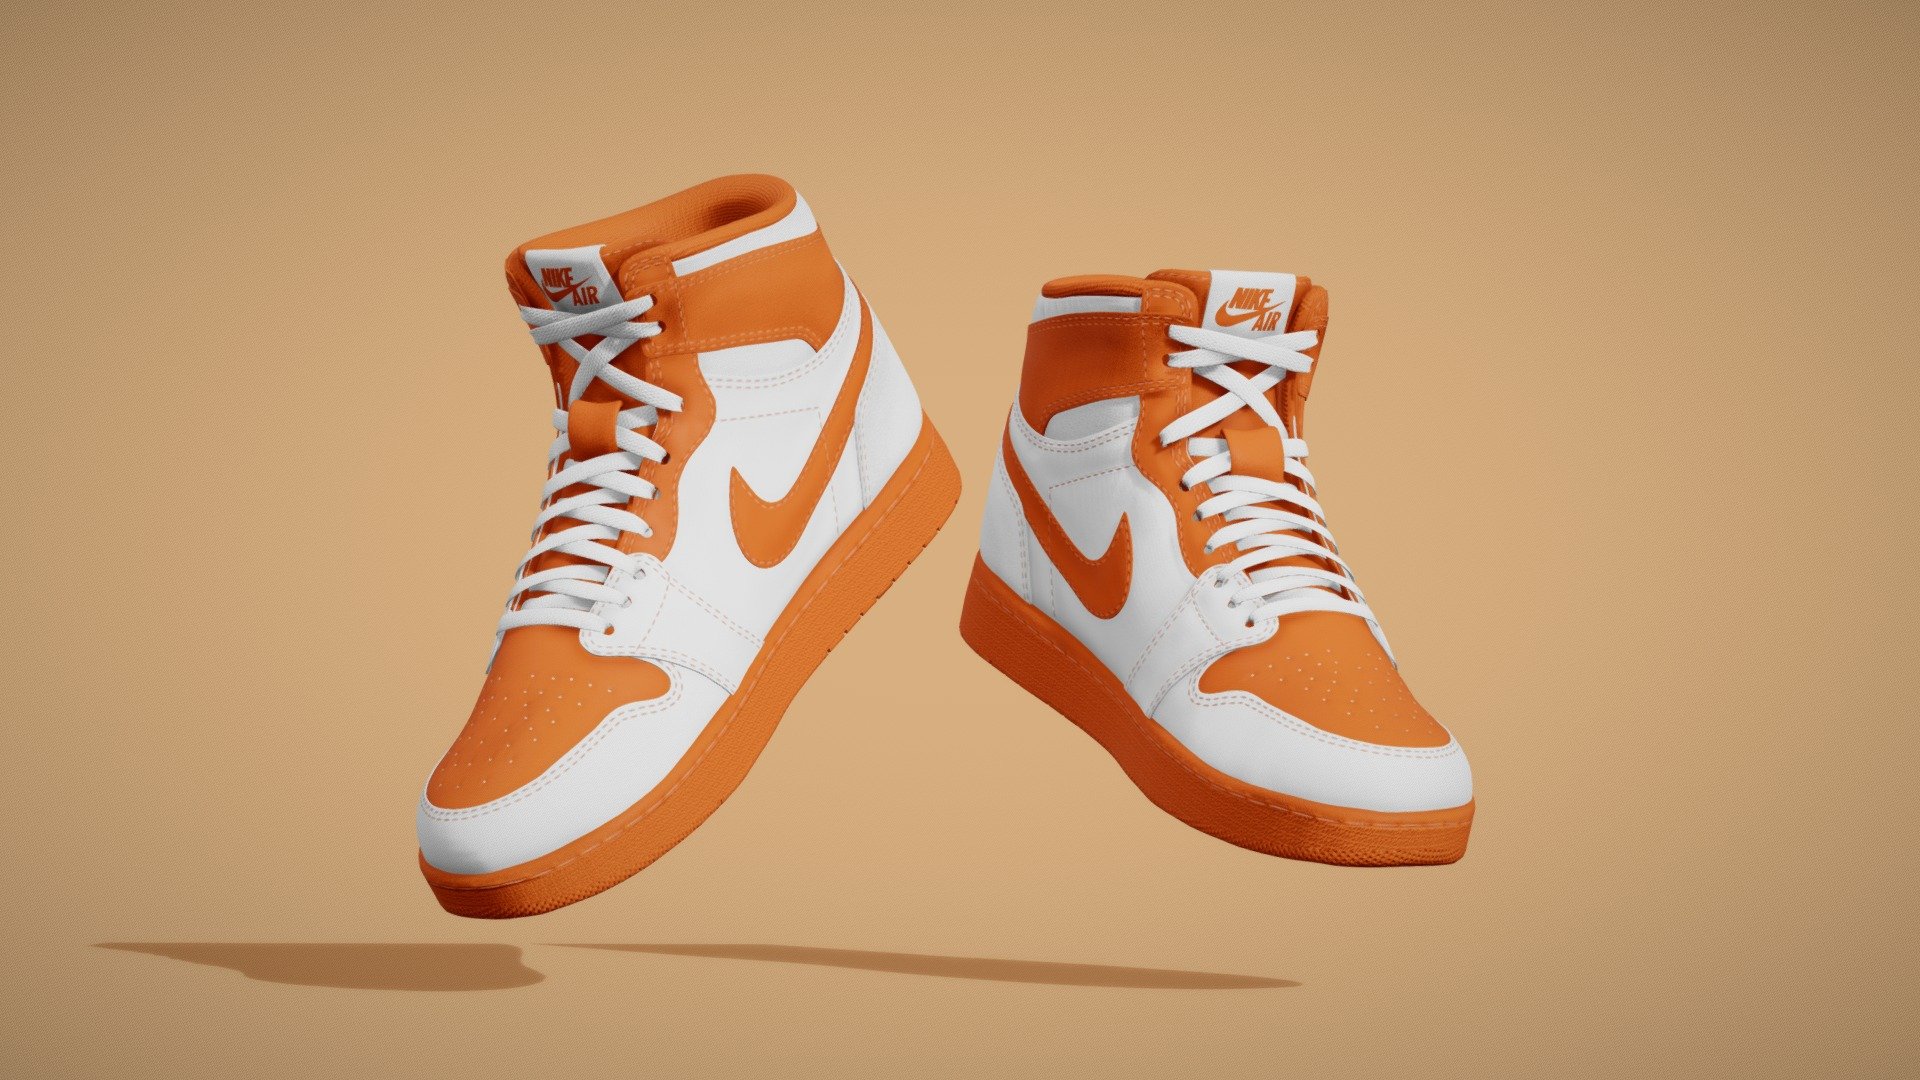 It is a High Quality Air Jordan NIKE Shoes 3d model

Modeling :
Modeled with fine Details,
Will be perfect for any Cool 3d character Project, Or can be traits of NFT Character

Texture :
Textured in High quality 4k texture ( 2 Material - 1 left shoe/2 Right Shoe )

Variants :
There are 10 different textures set and this is 8 of 10 Variants.

Lowpoly Model :  https://skfb.ly/oQPIq

Pack of 10 : https://skfb.ly/oRntY ( 50 % off )

Feel free to comment for review of this model or any suggestions 3d model